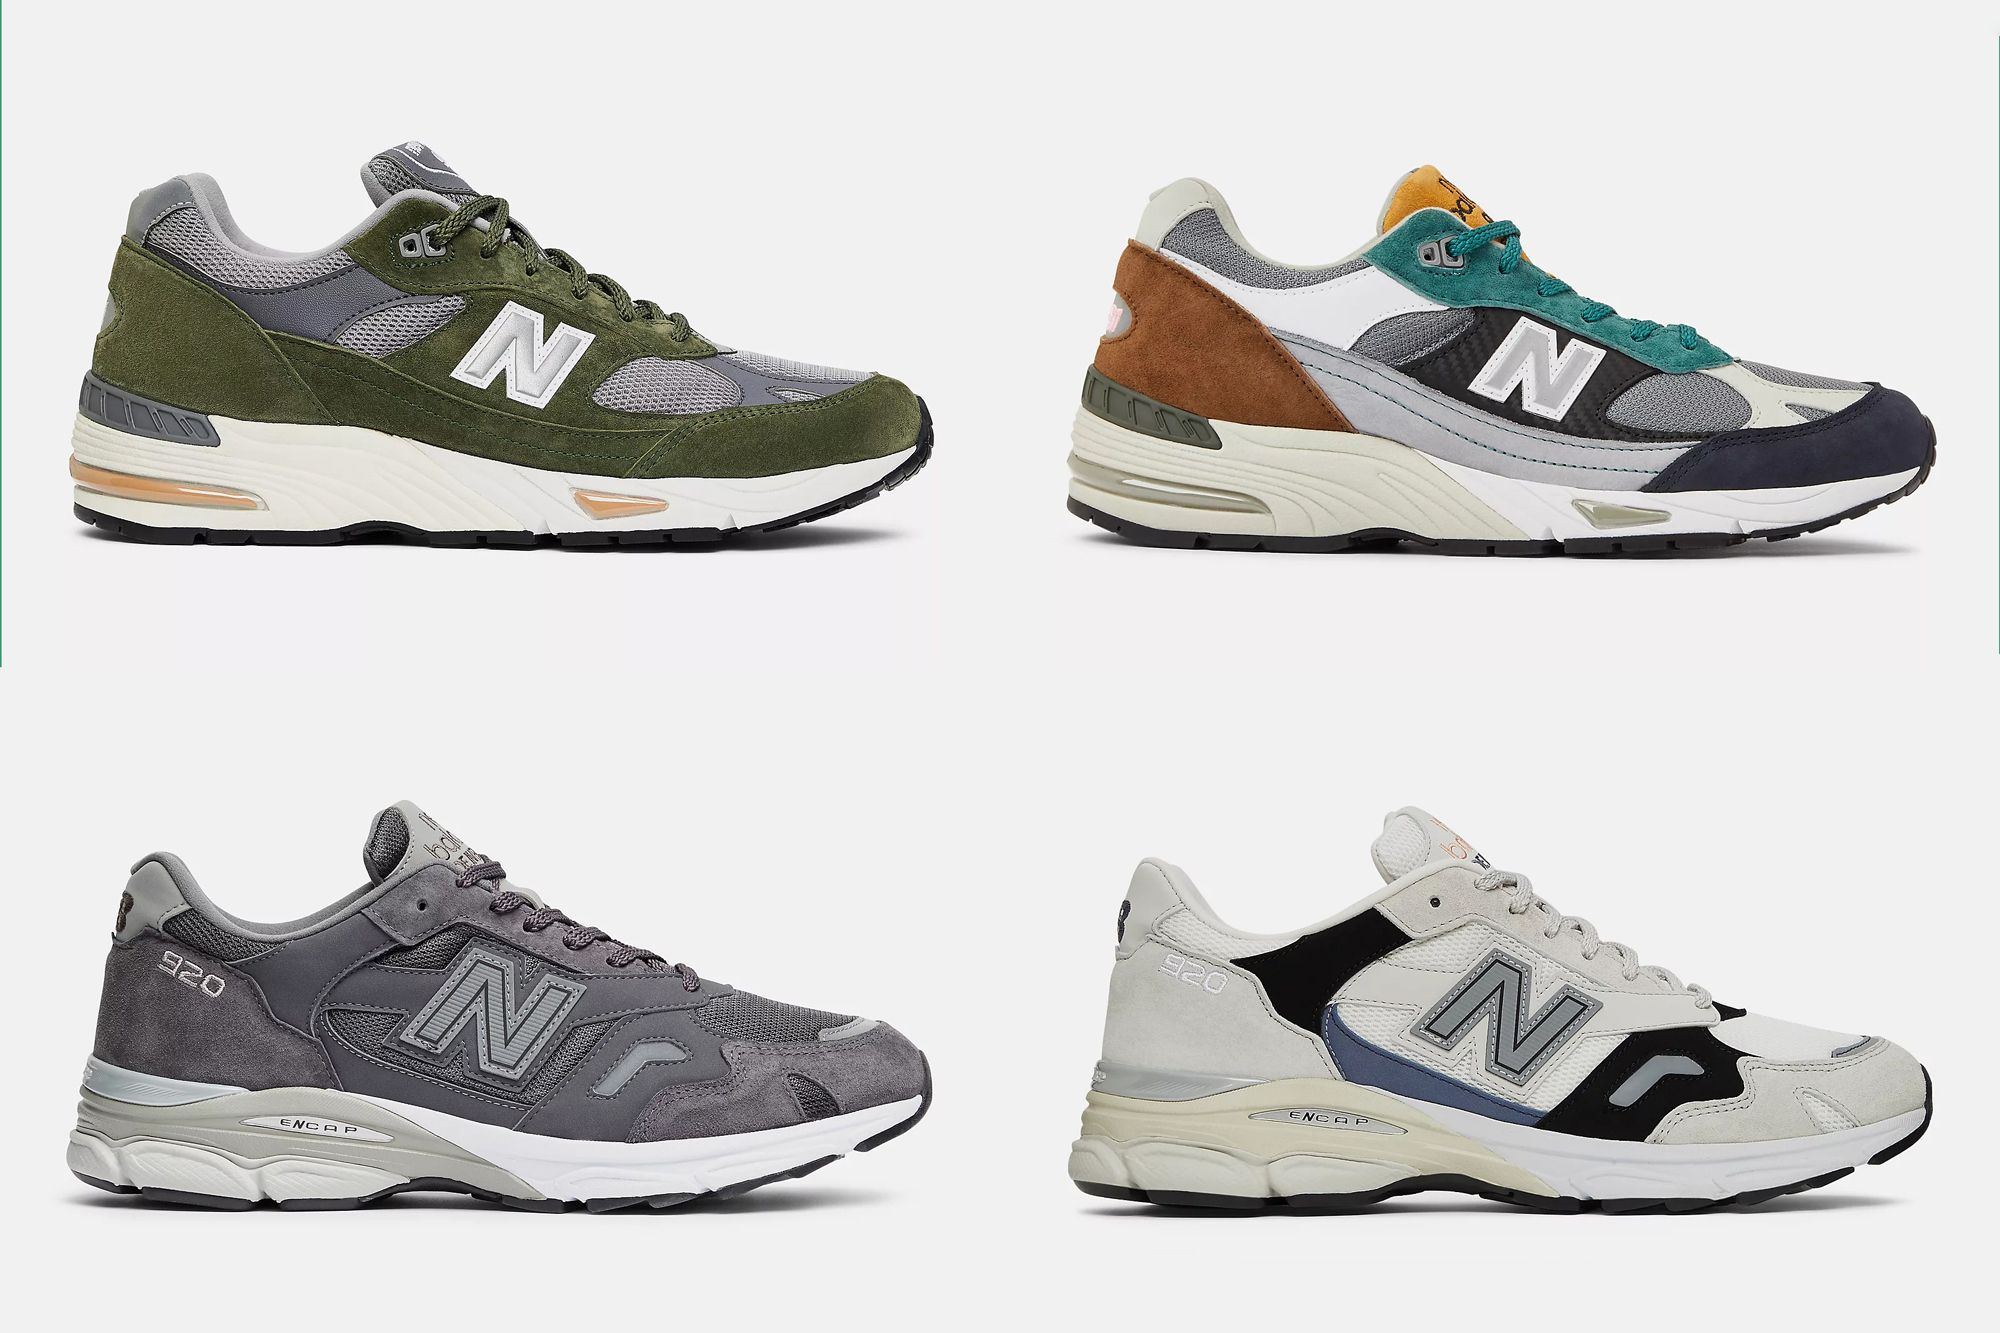 Fresh From Flimby: New MADE in UK New Balance 991s and 920s 